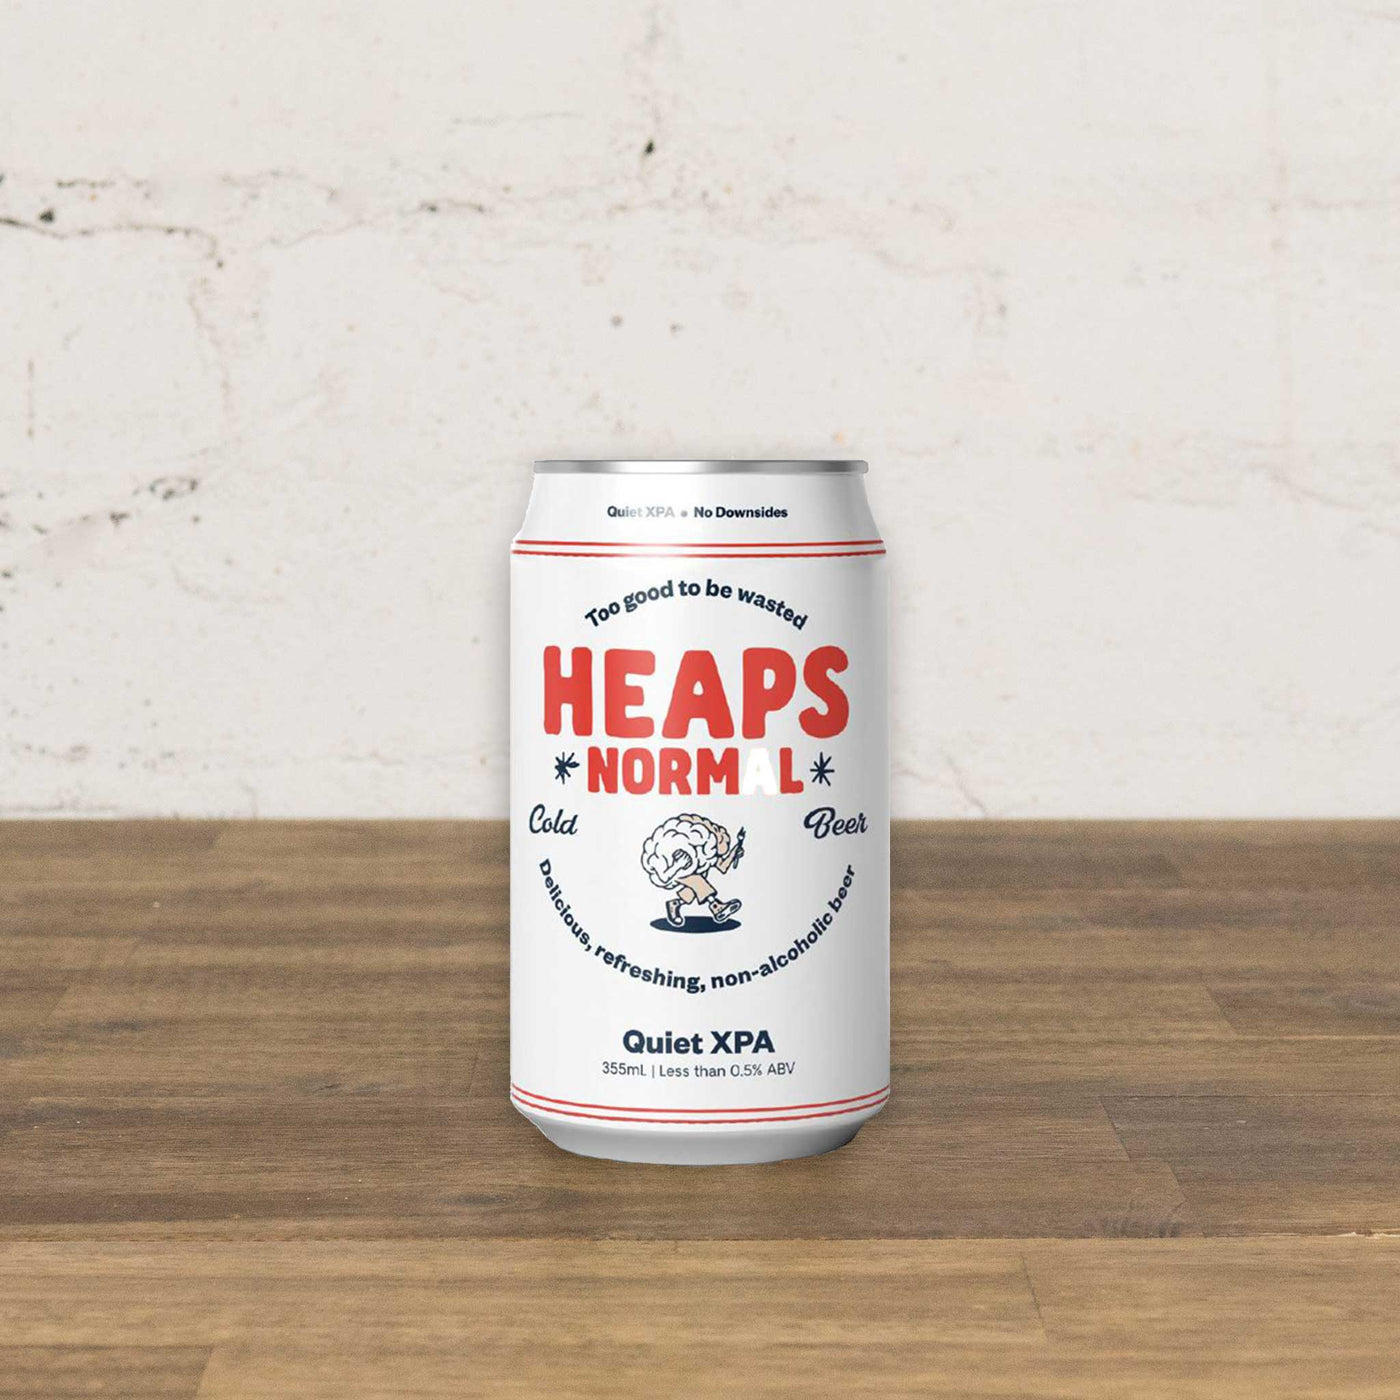 Heaps Normal Quiet XPA Alcohol Free Beer